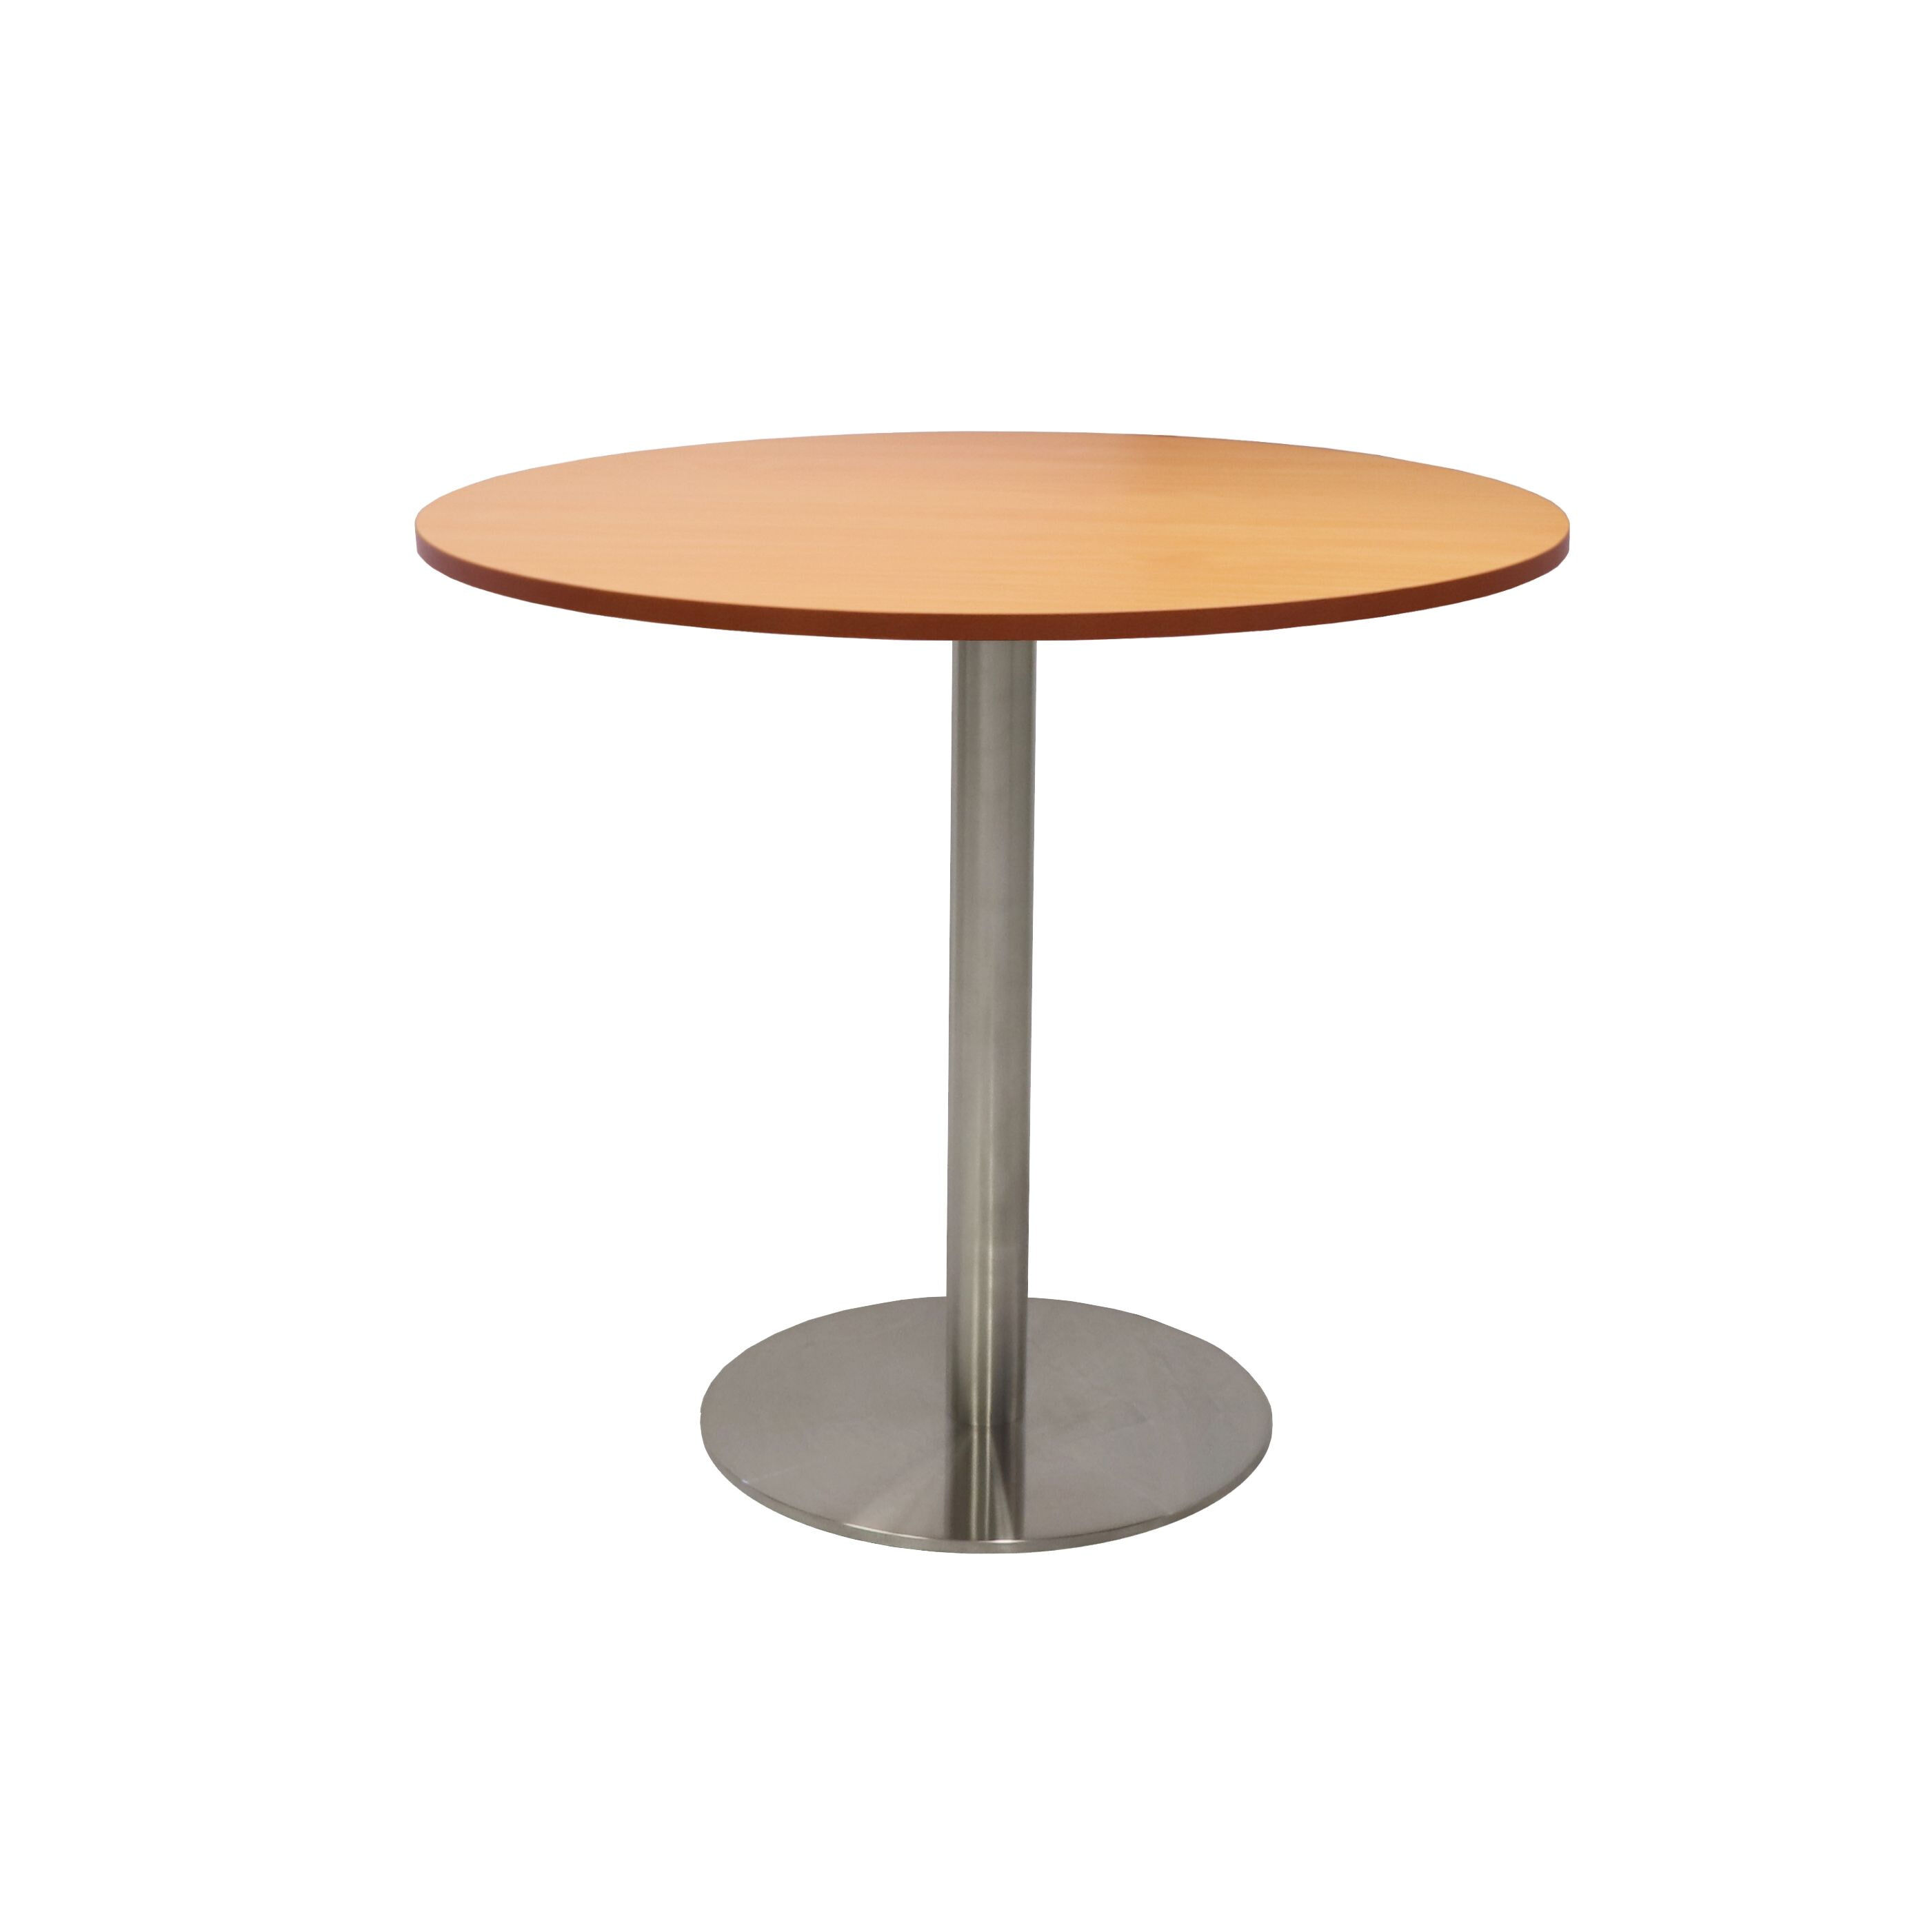 Stainless Steel with Classic Beech Table Top